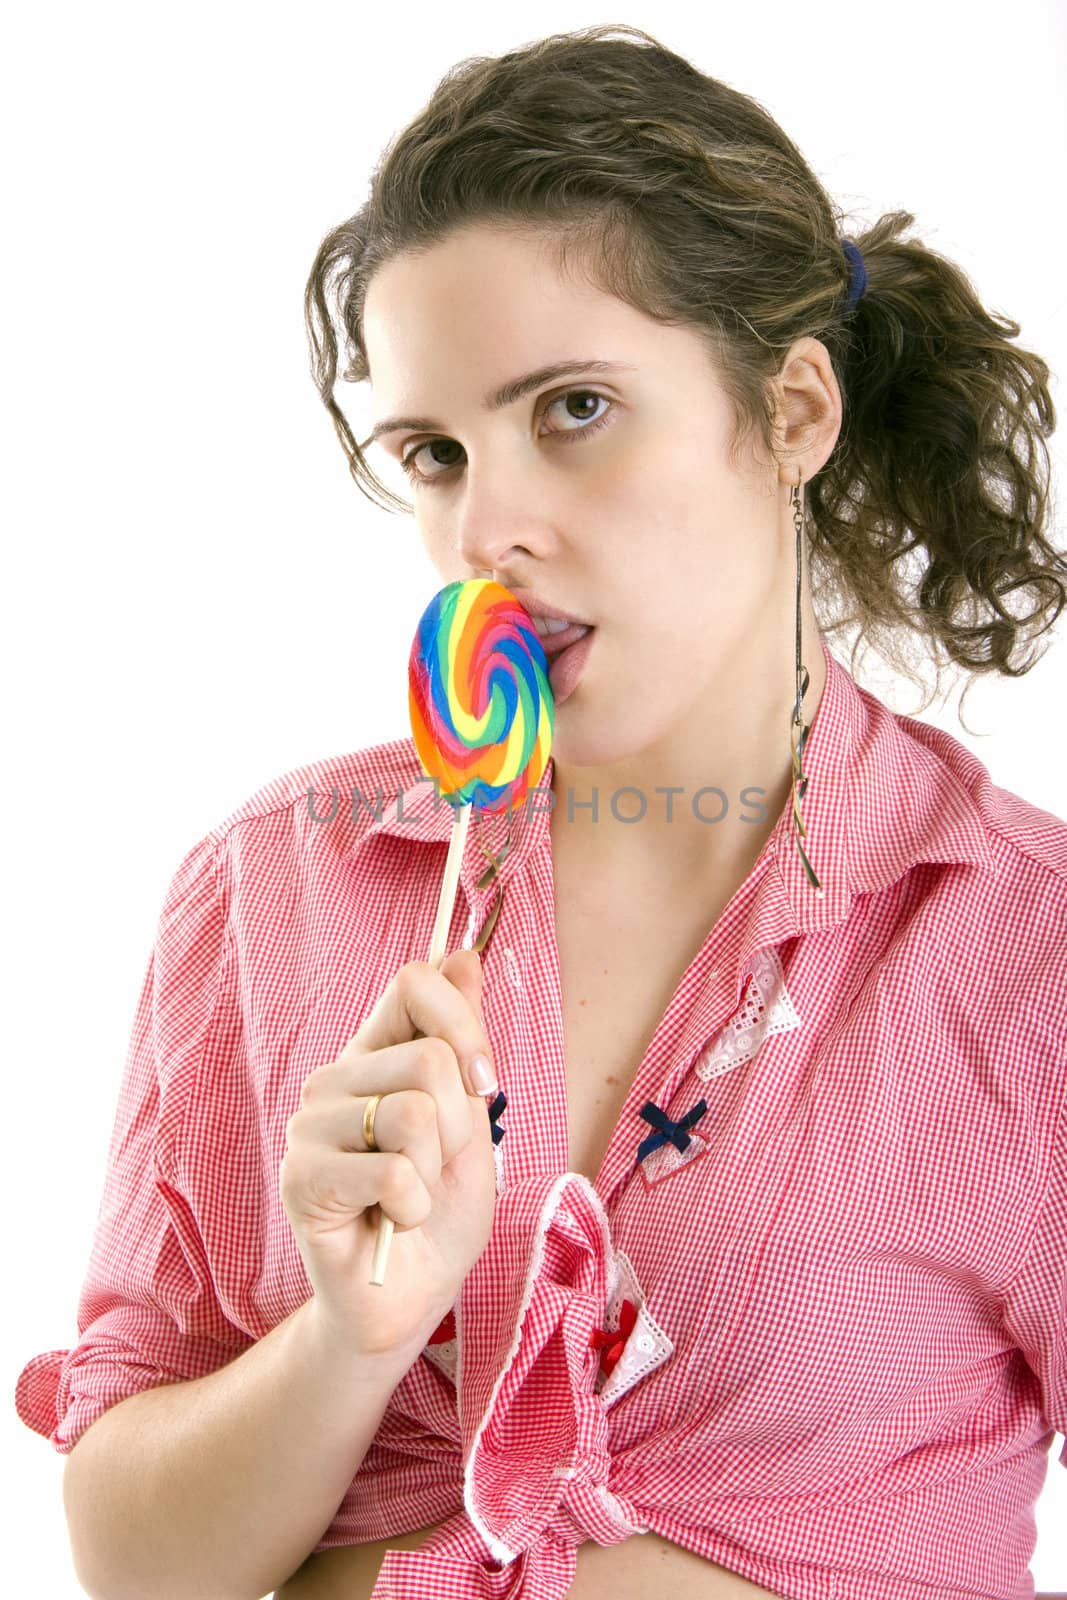 woman with candy on white background

